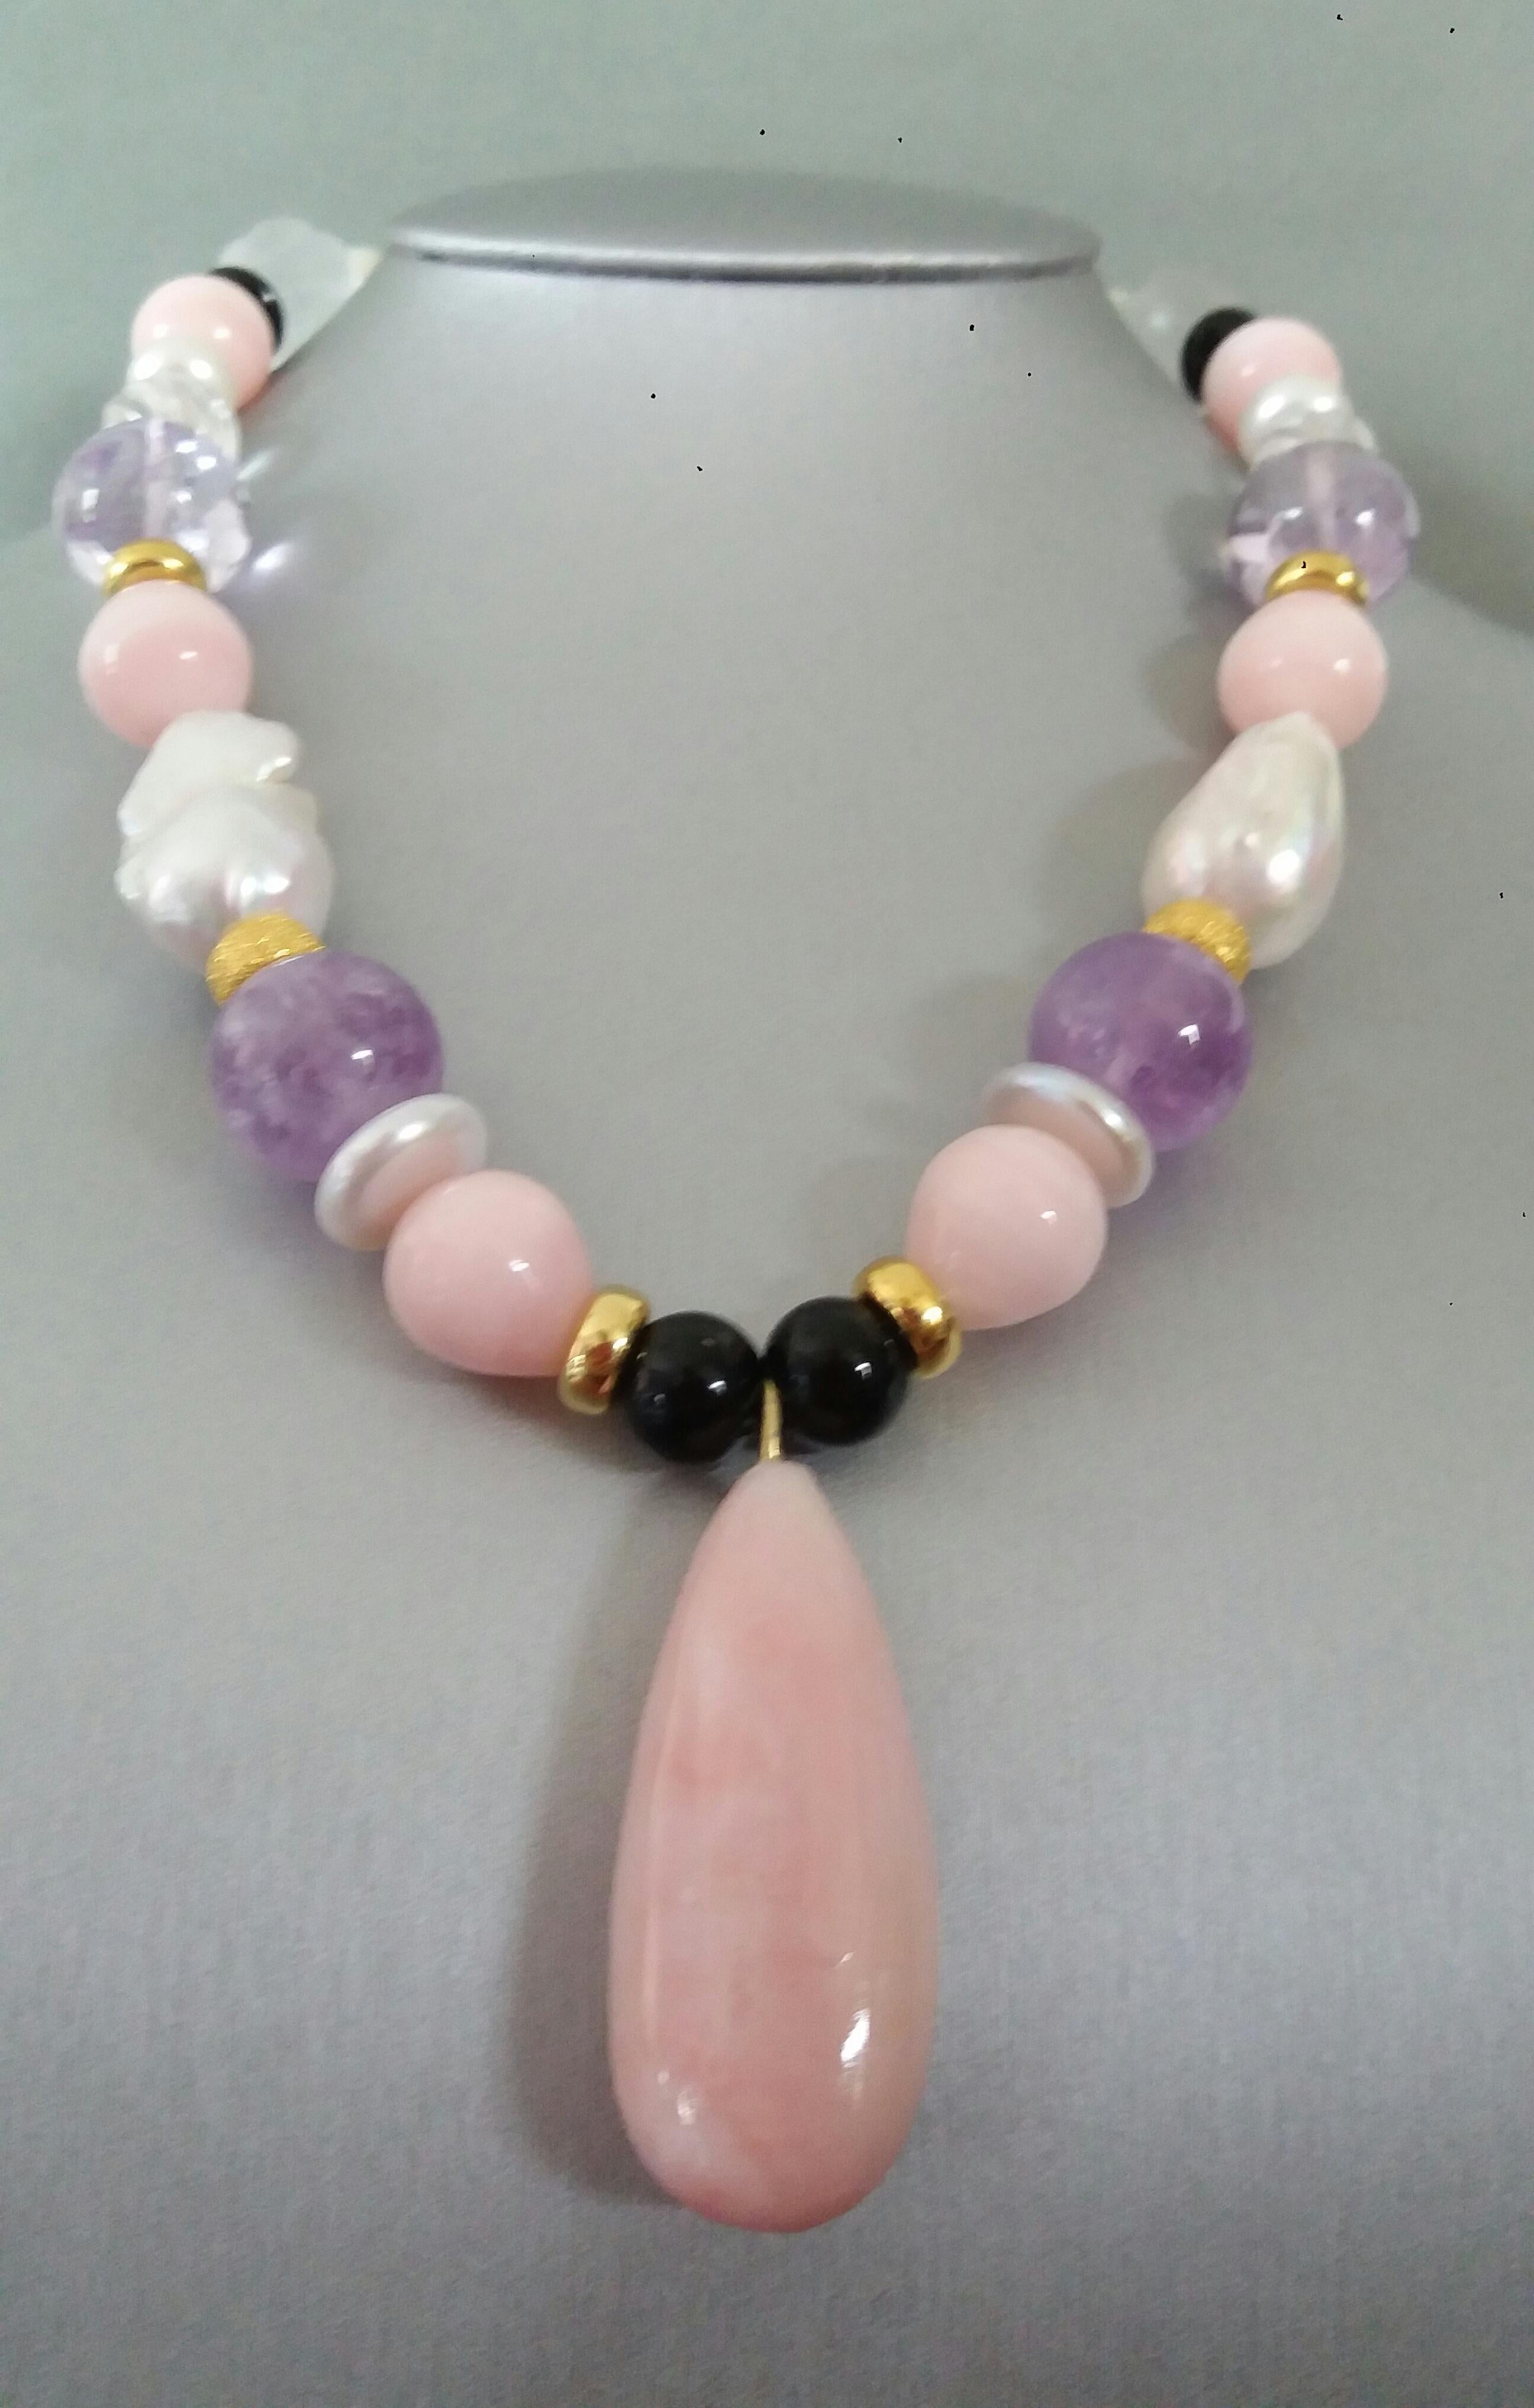 Mixed Cut Pink Opal Beads and Pendant Amethyst Pearls Quartz Onyx Yellow Gold Necklace For Sale